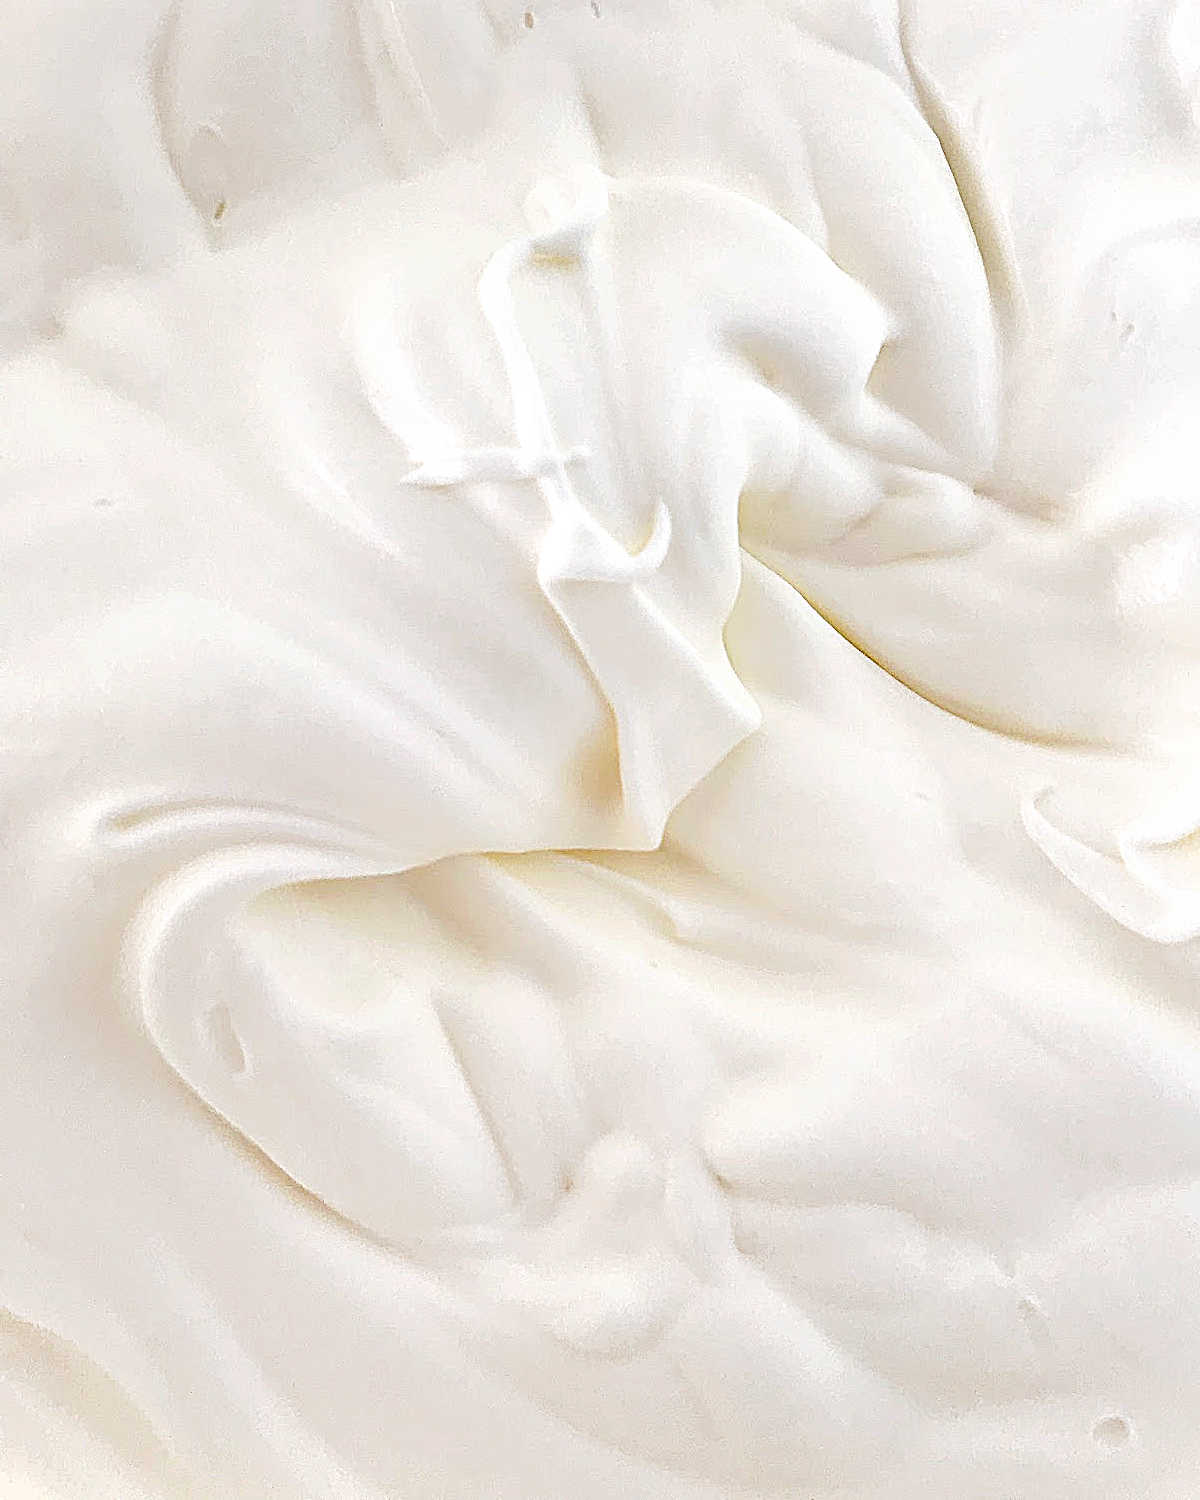 Close-up image of whipped cream.